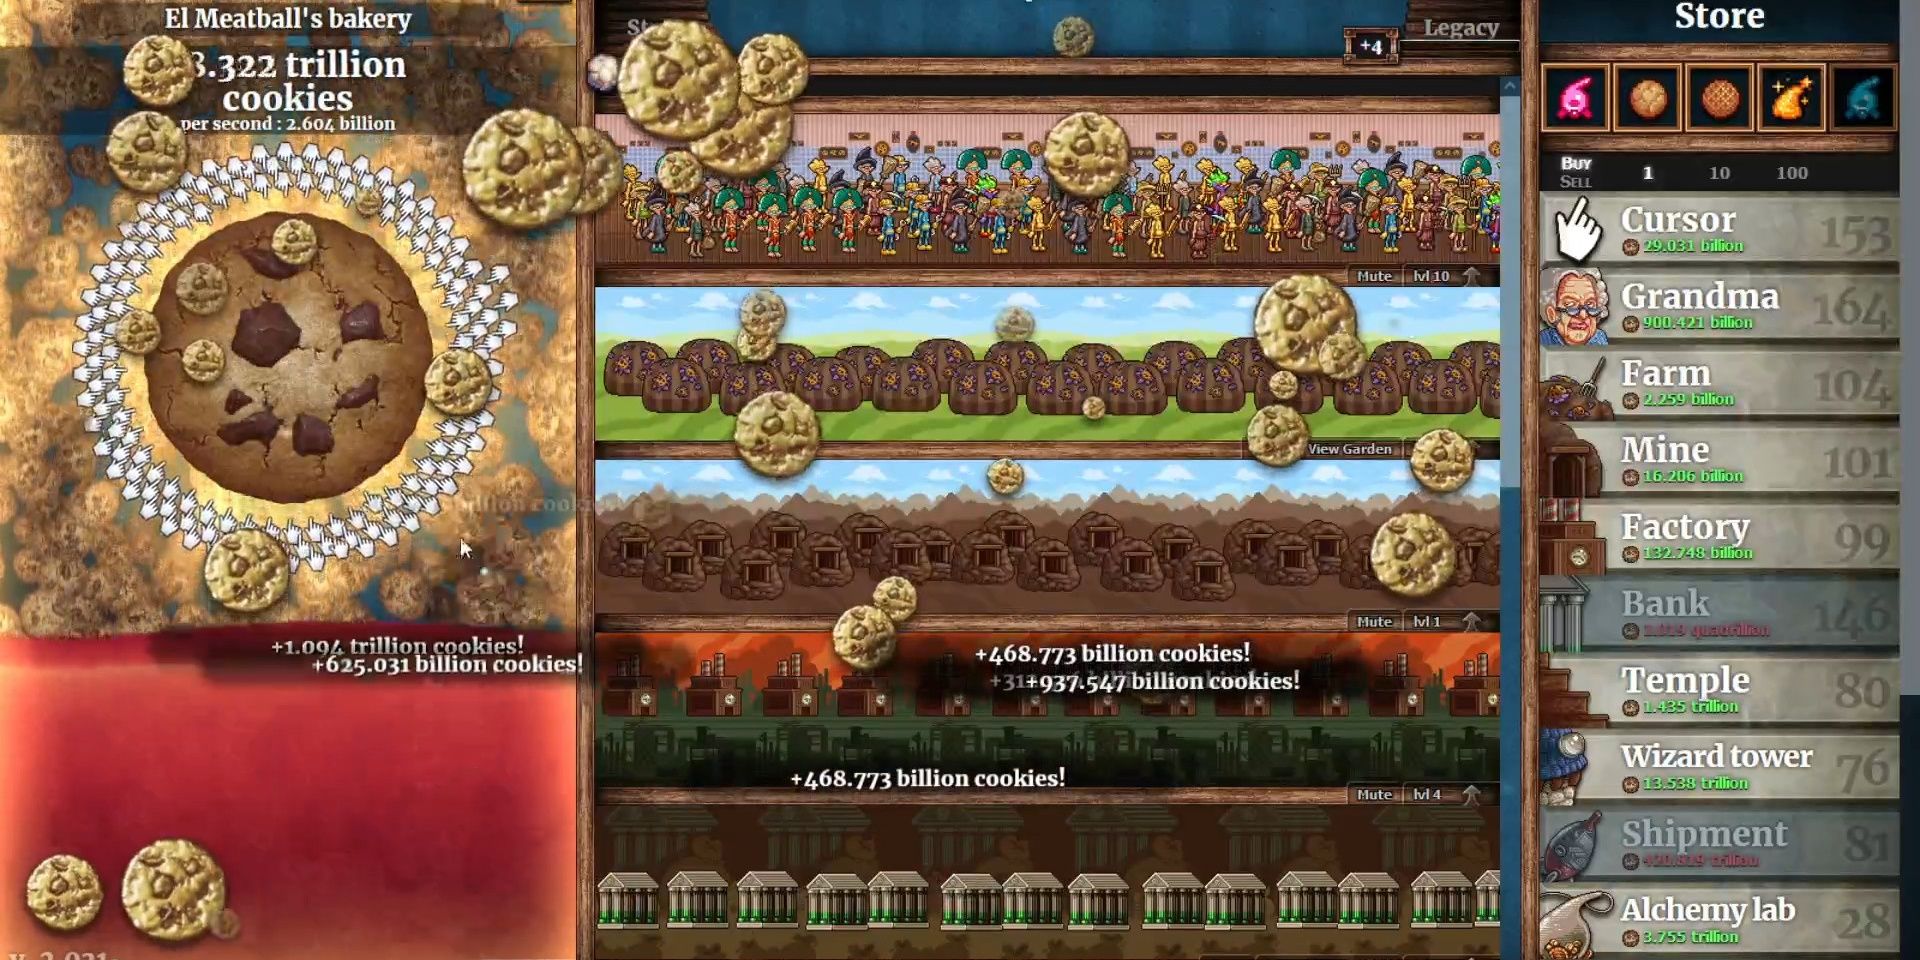 Many farms, mines, factories, and other layers set up for Cookie Clicker, with this game sitting at over a trillion cookies